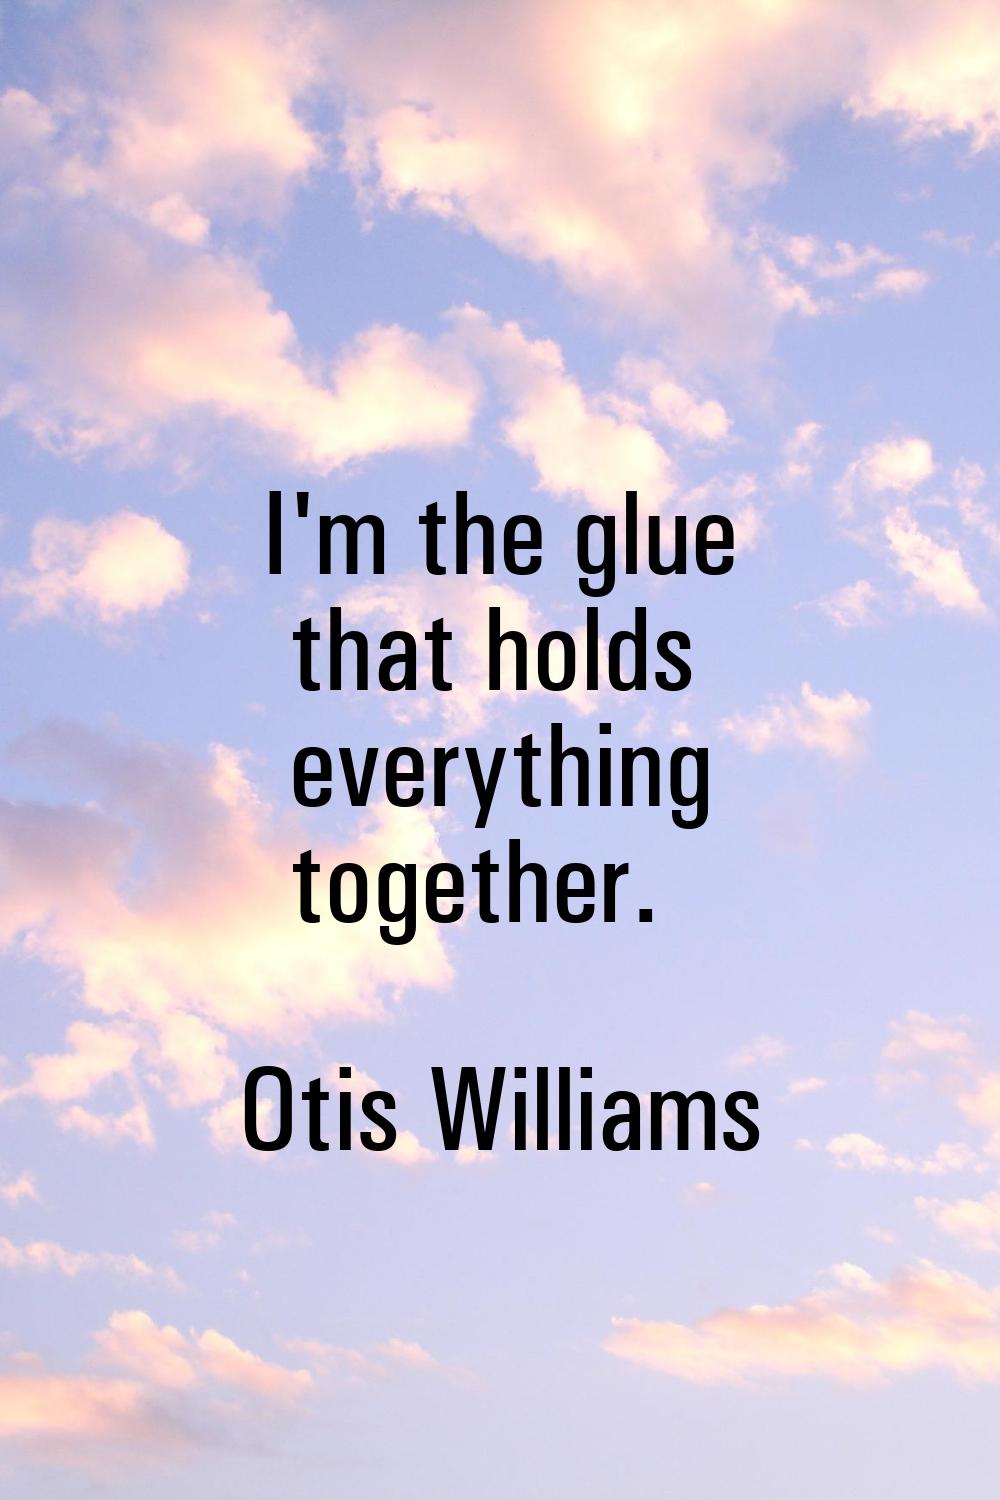 I'm the glue that holds everything together.